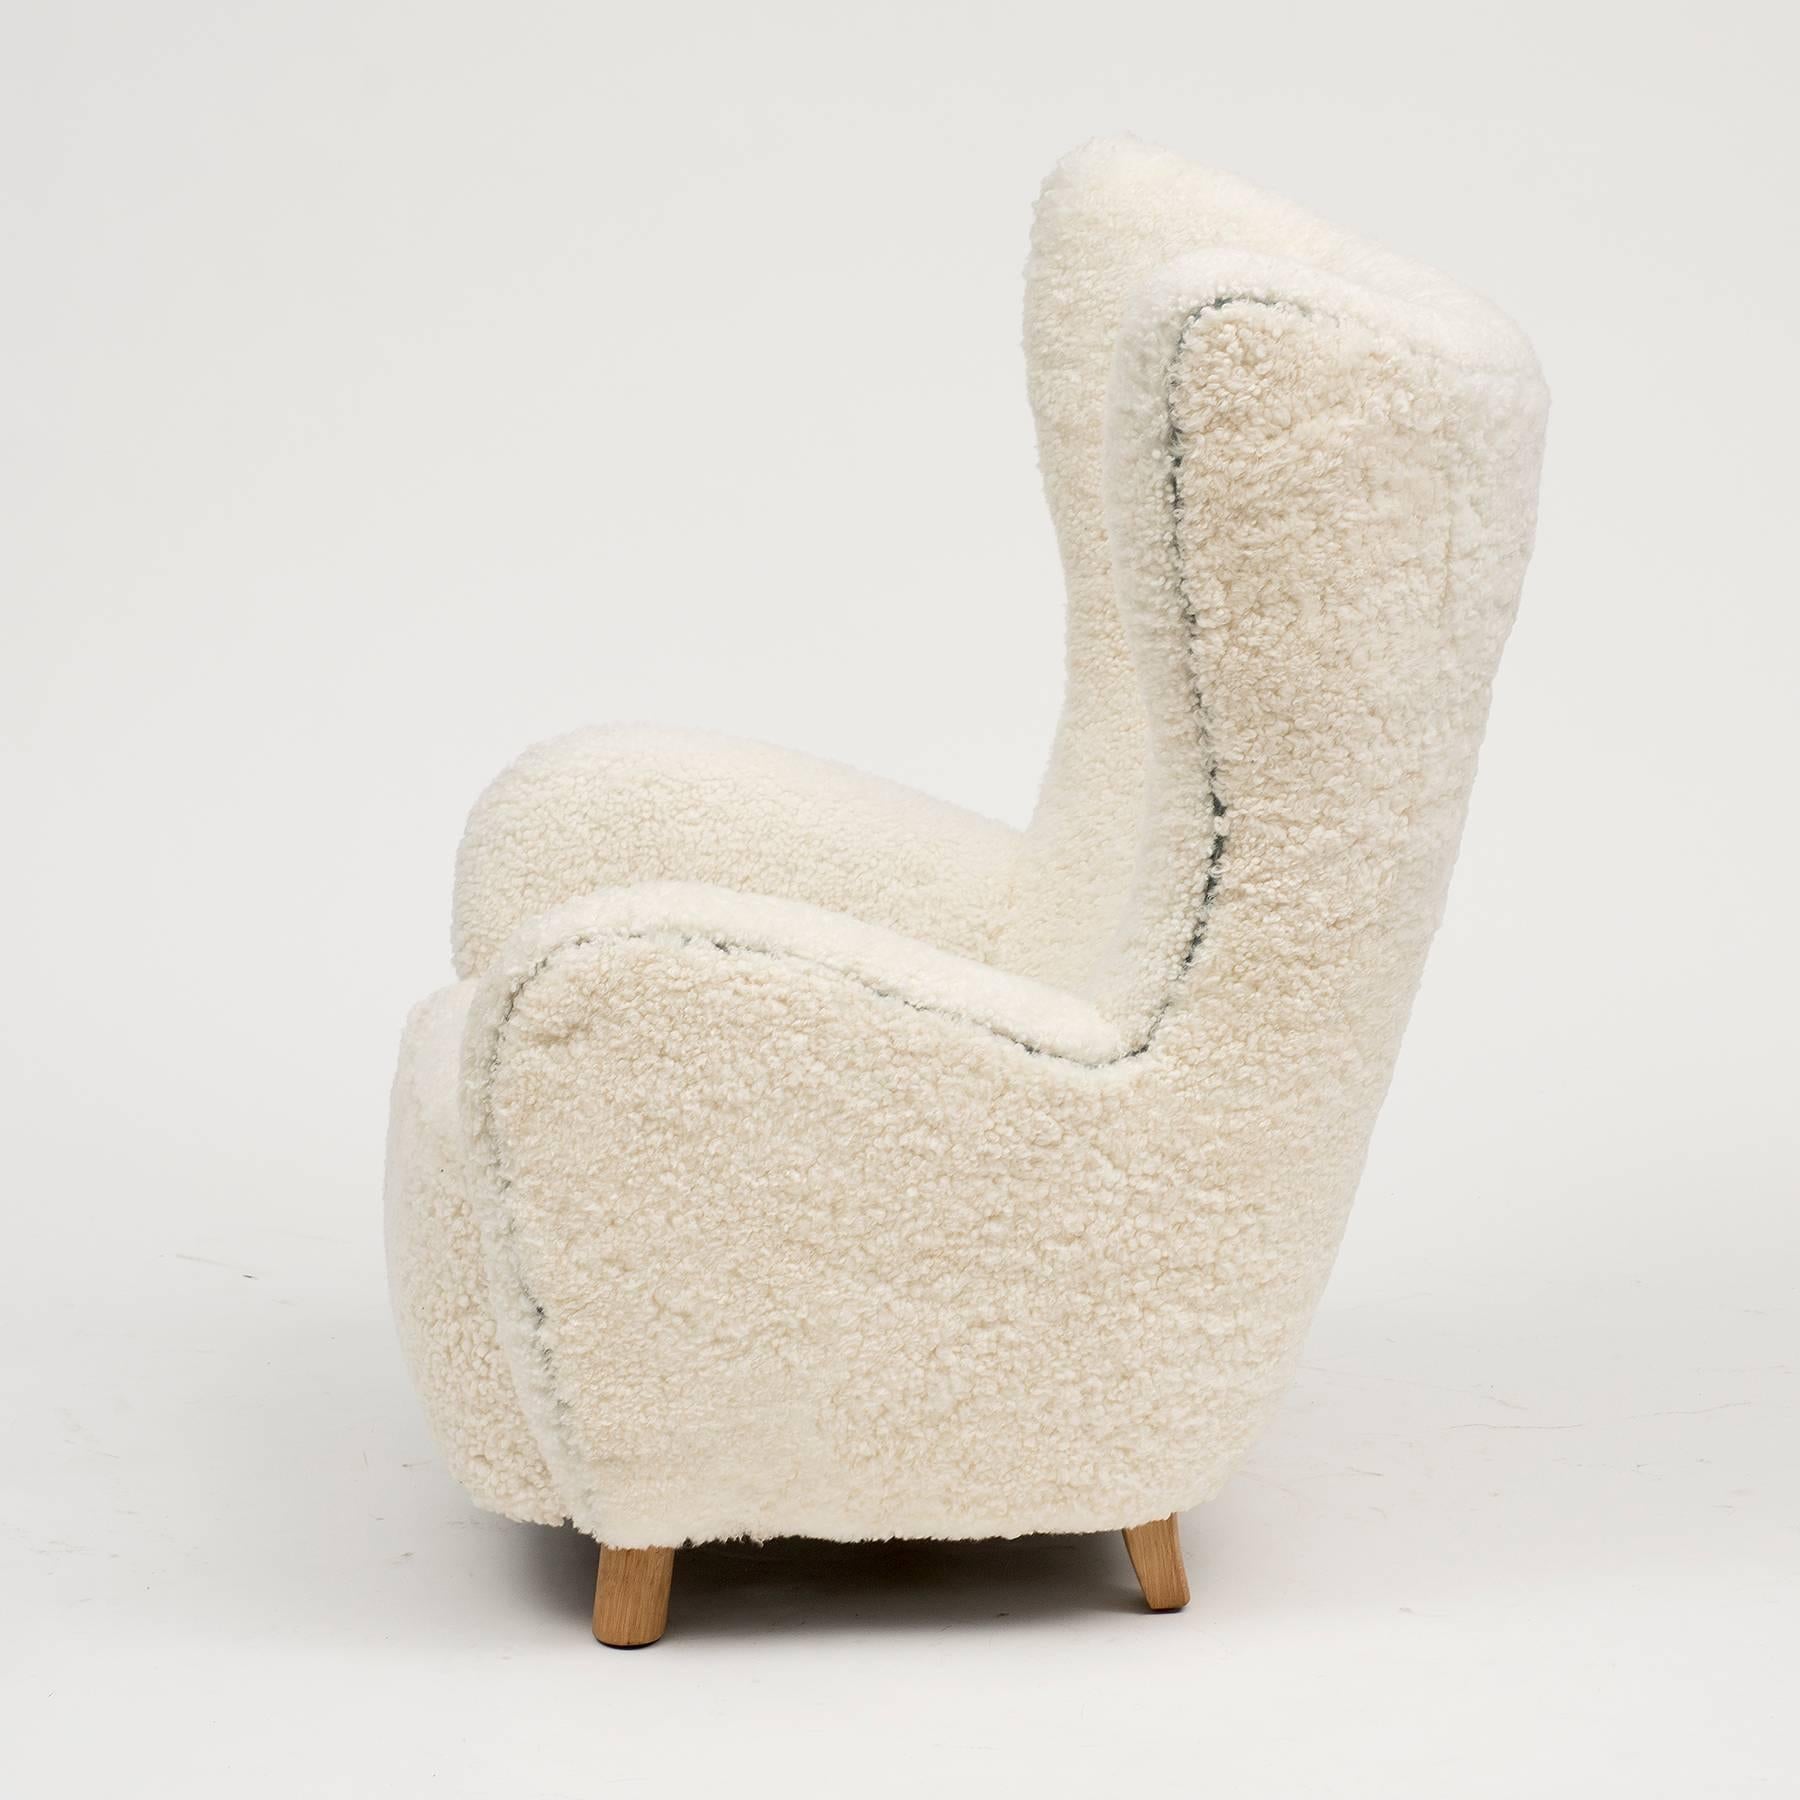 A wingback chair by Mogens Lassen in white sheepskin with grey/blue suede piping and buttons, and oak feet, Denmark, 1930s.